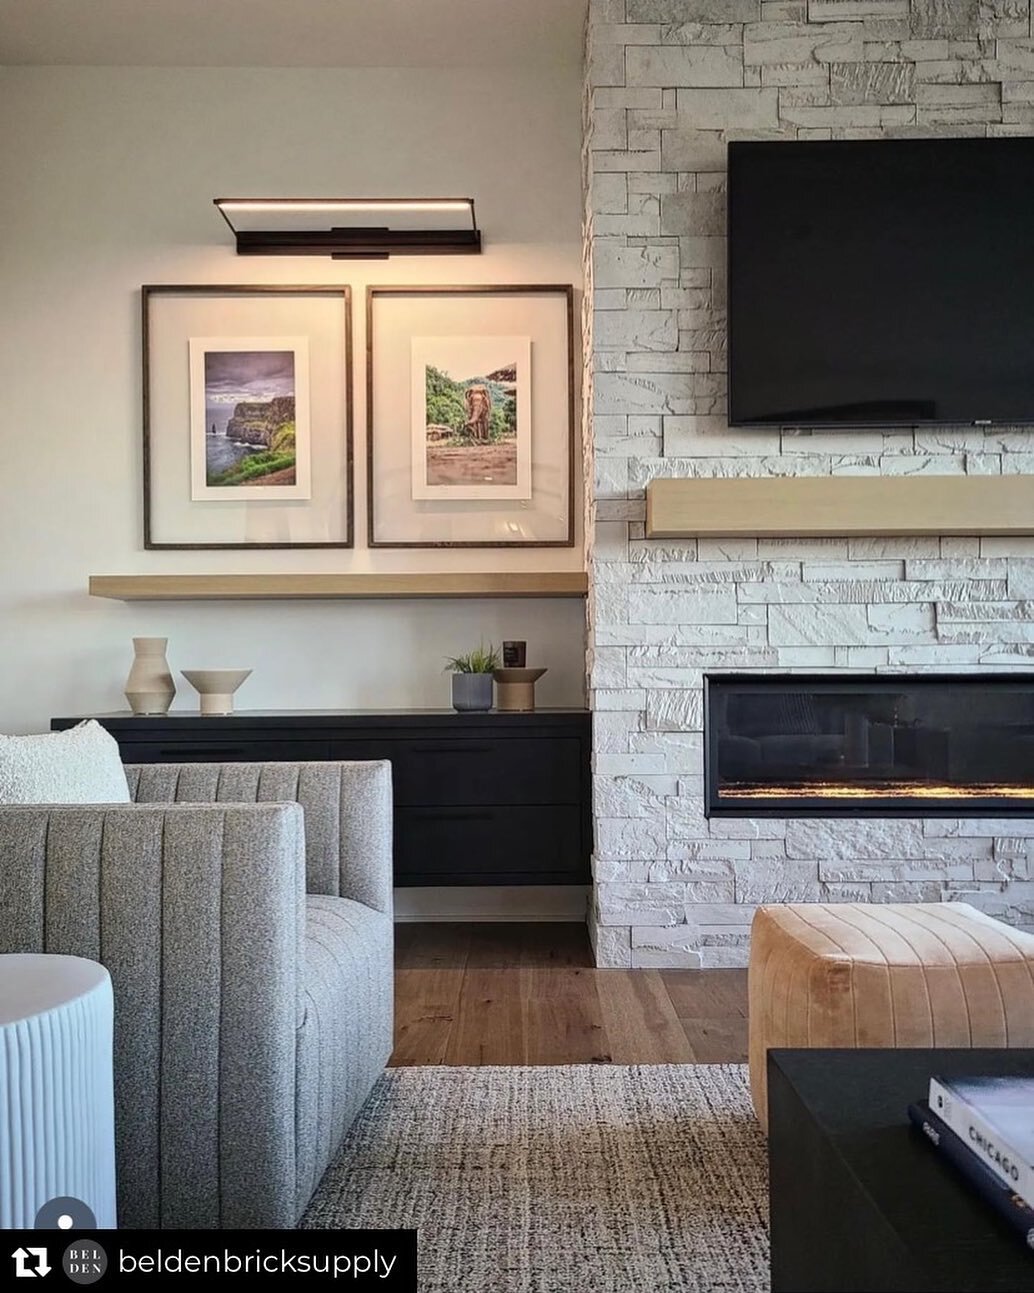 Repost from @beldenbricksupply
&bull;
Showcasing the stunning work of @cvi_design! We feel so fortunate to work with such talented people! 

#fireplace
#fireplacedesign 
#fireplacegoals 
#interiordesign 
#housegoals 

Interior Designer: @cvi_design 
